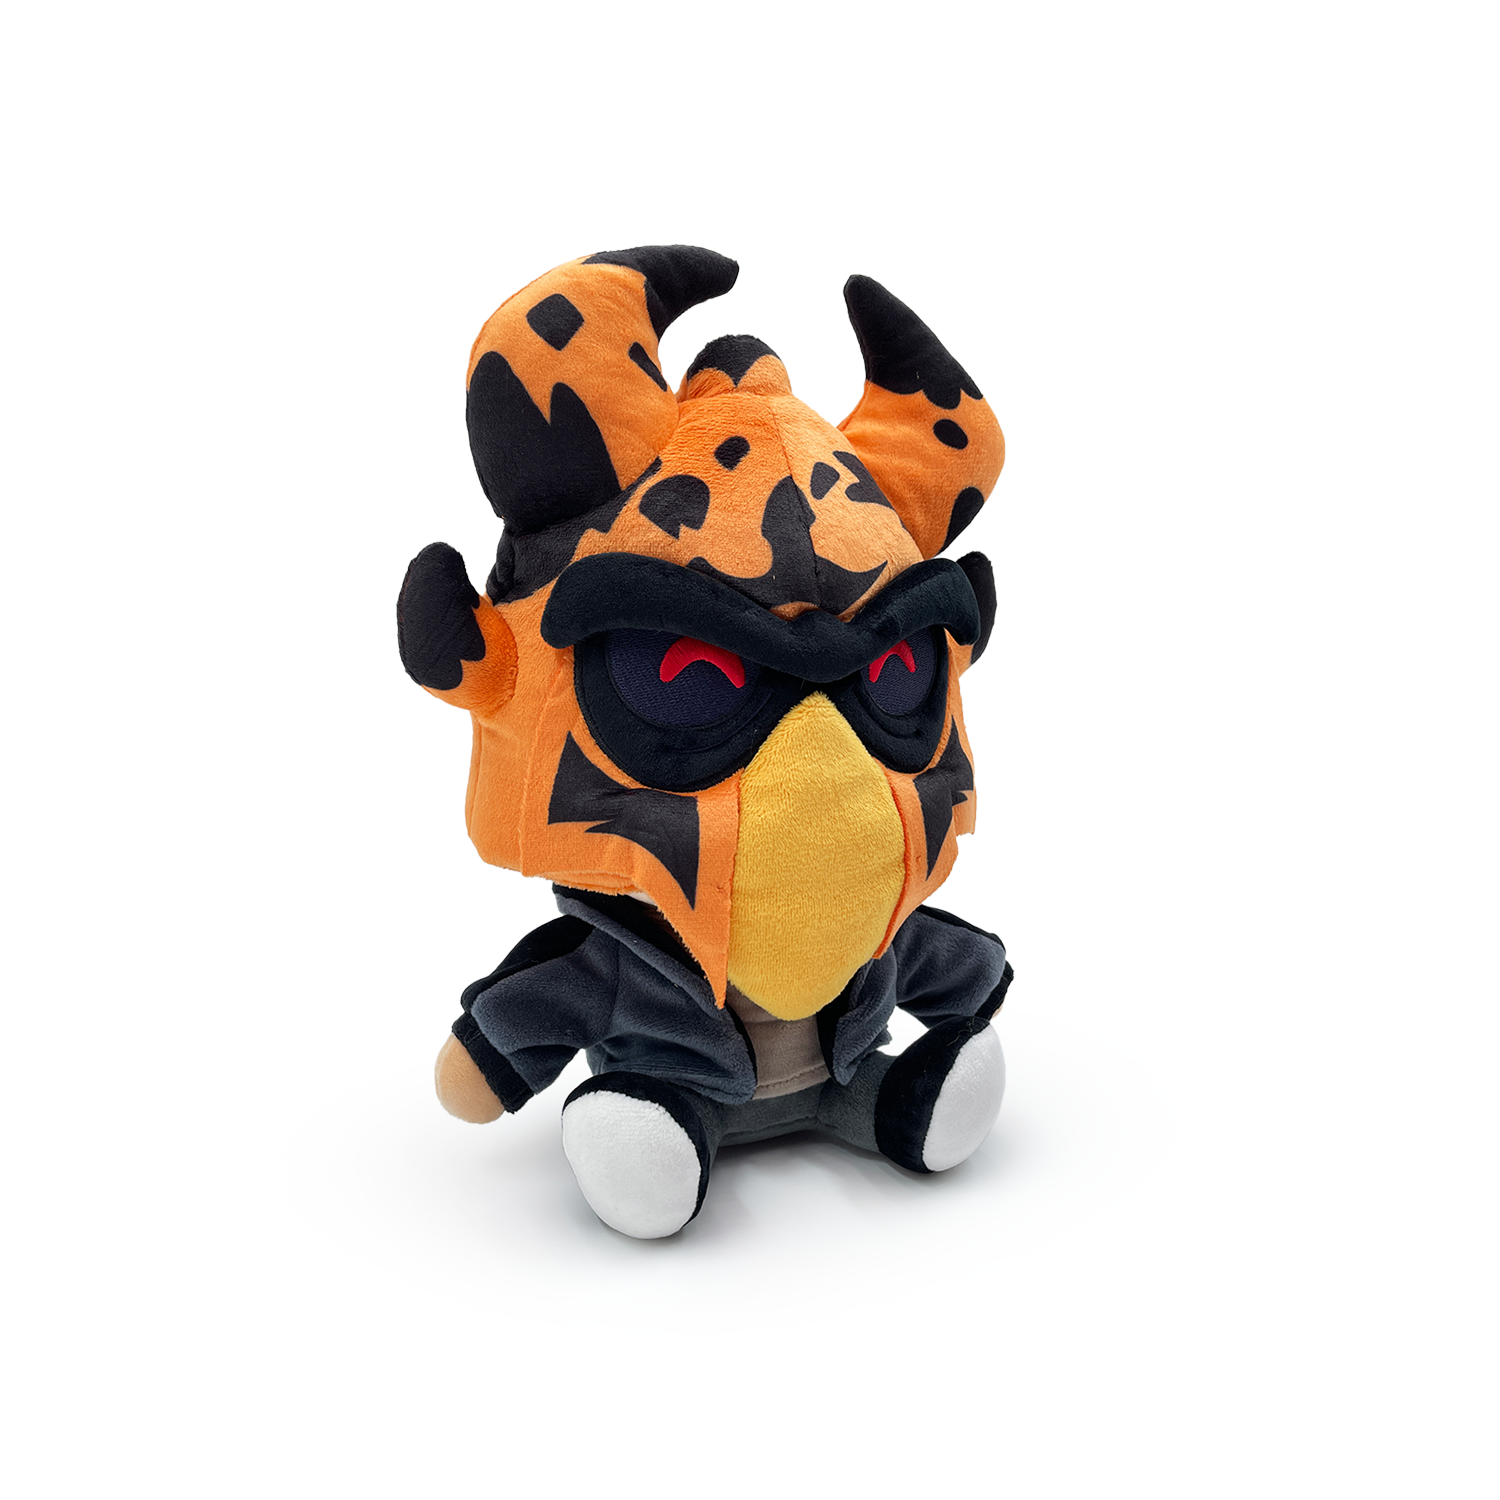 Kevduit Plush (9in) – Youtooz Collectibles